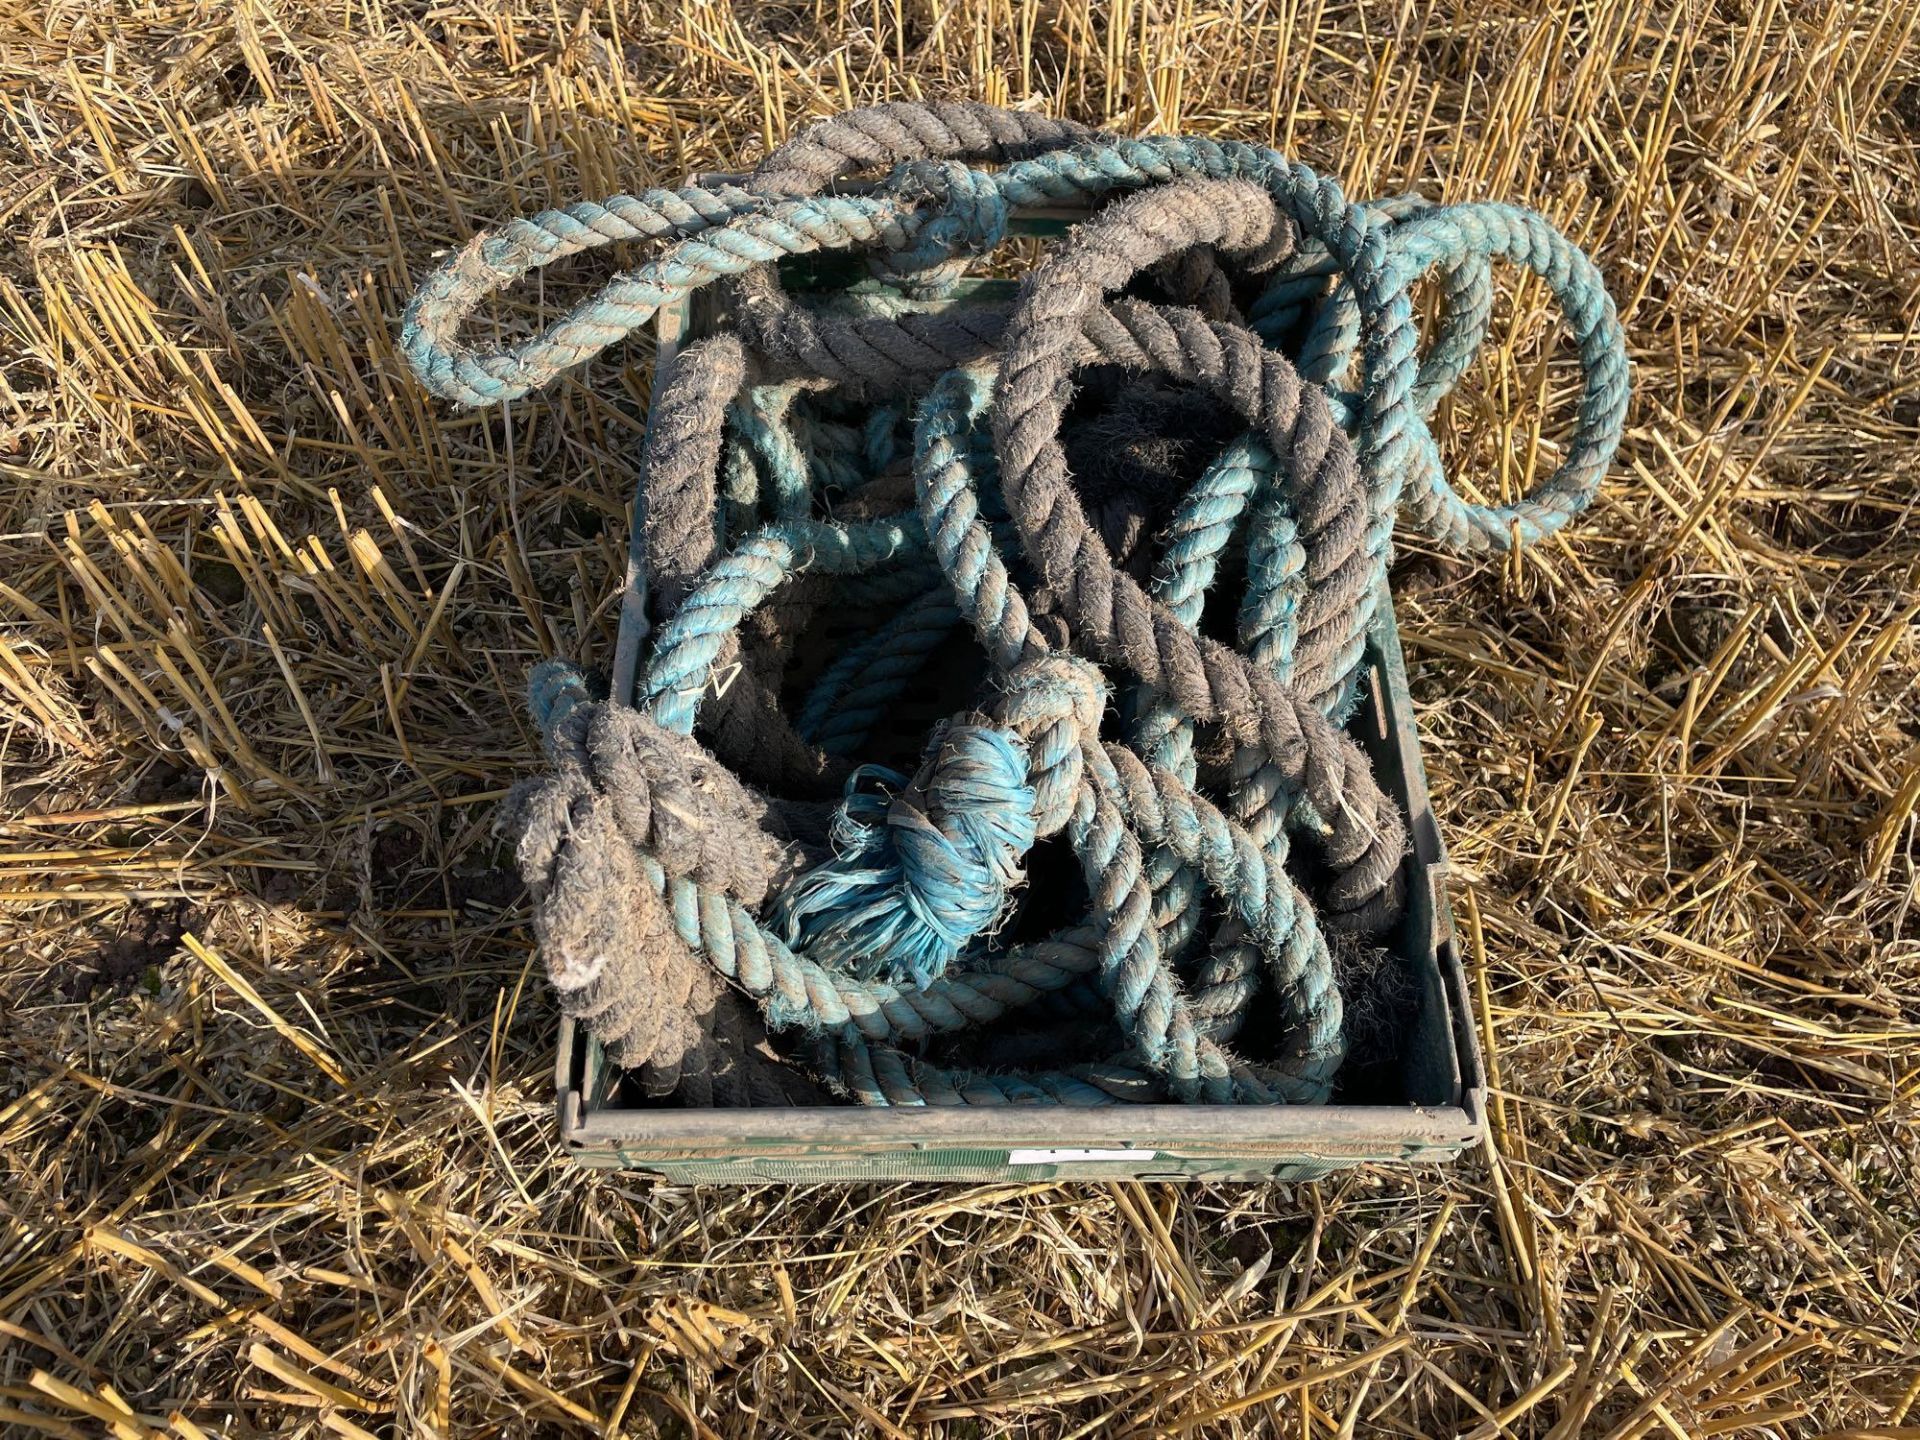 Length of rope